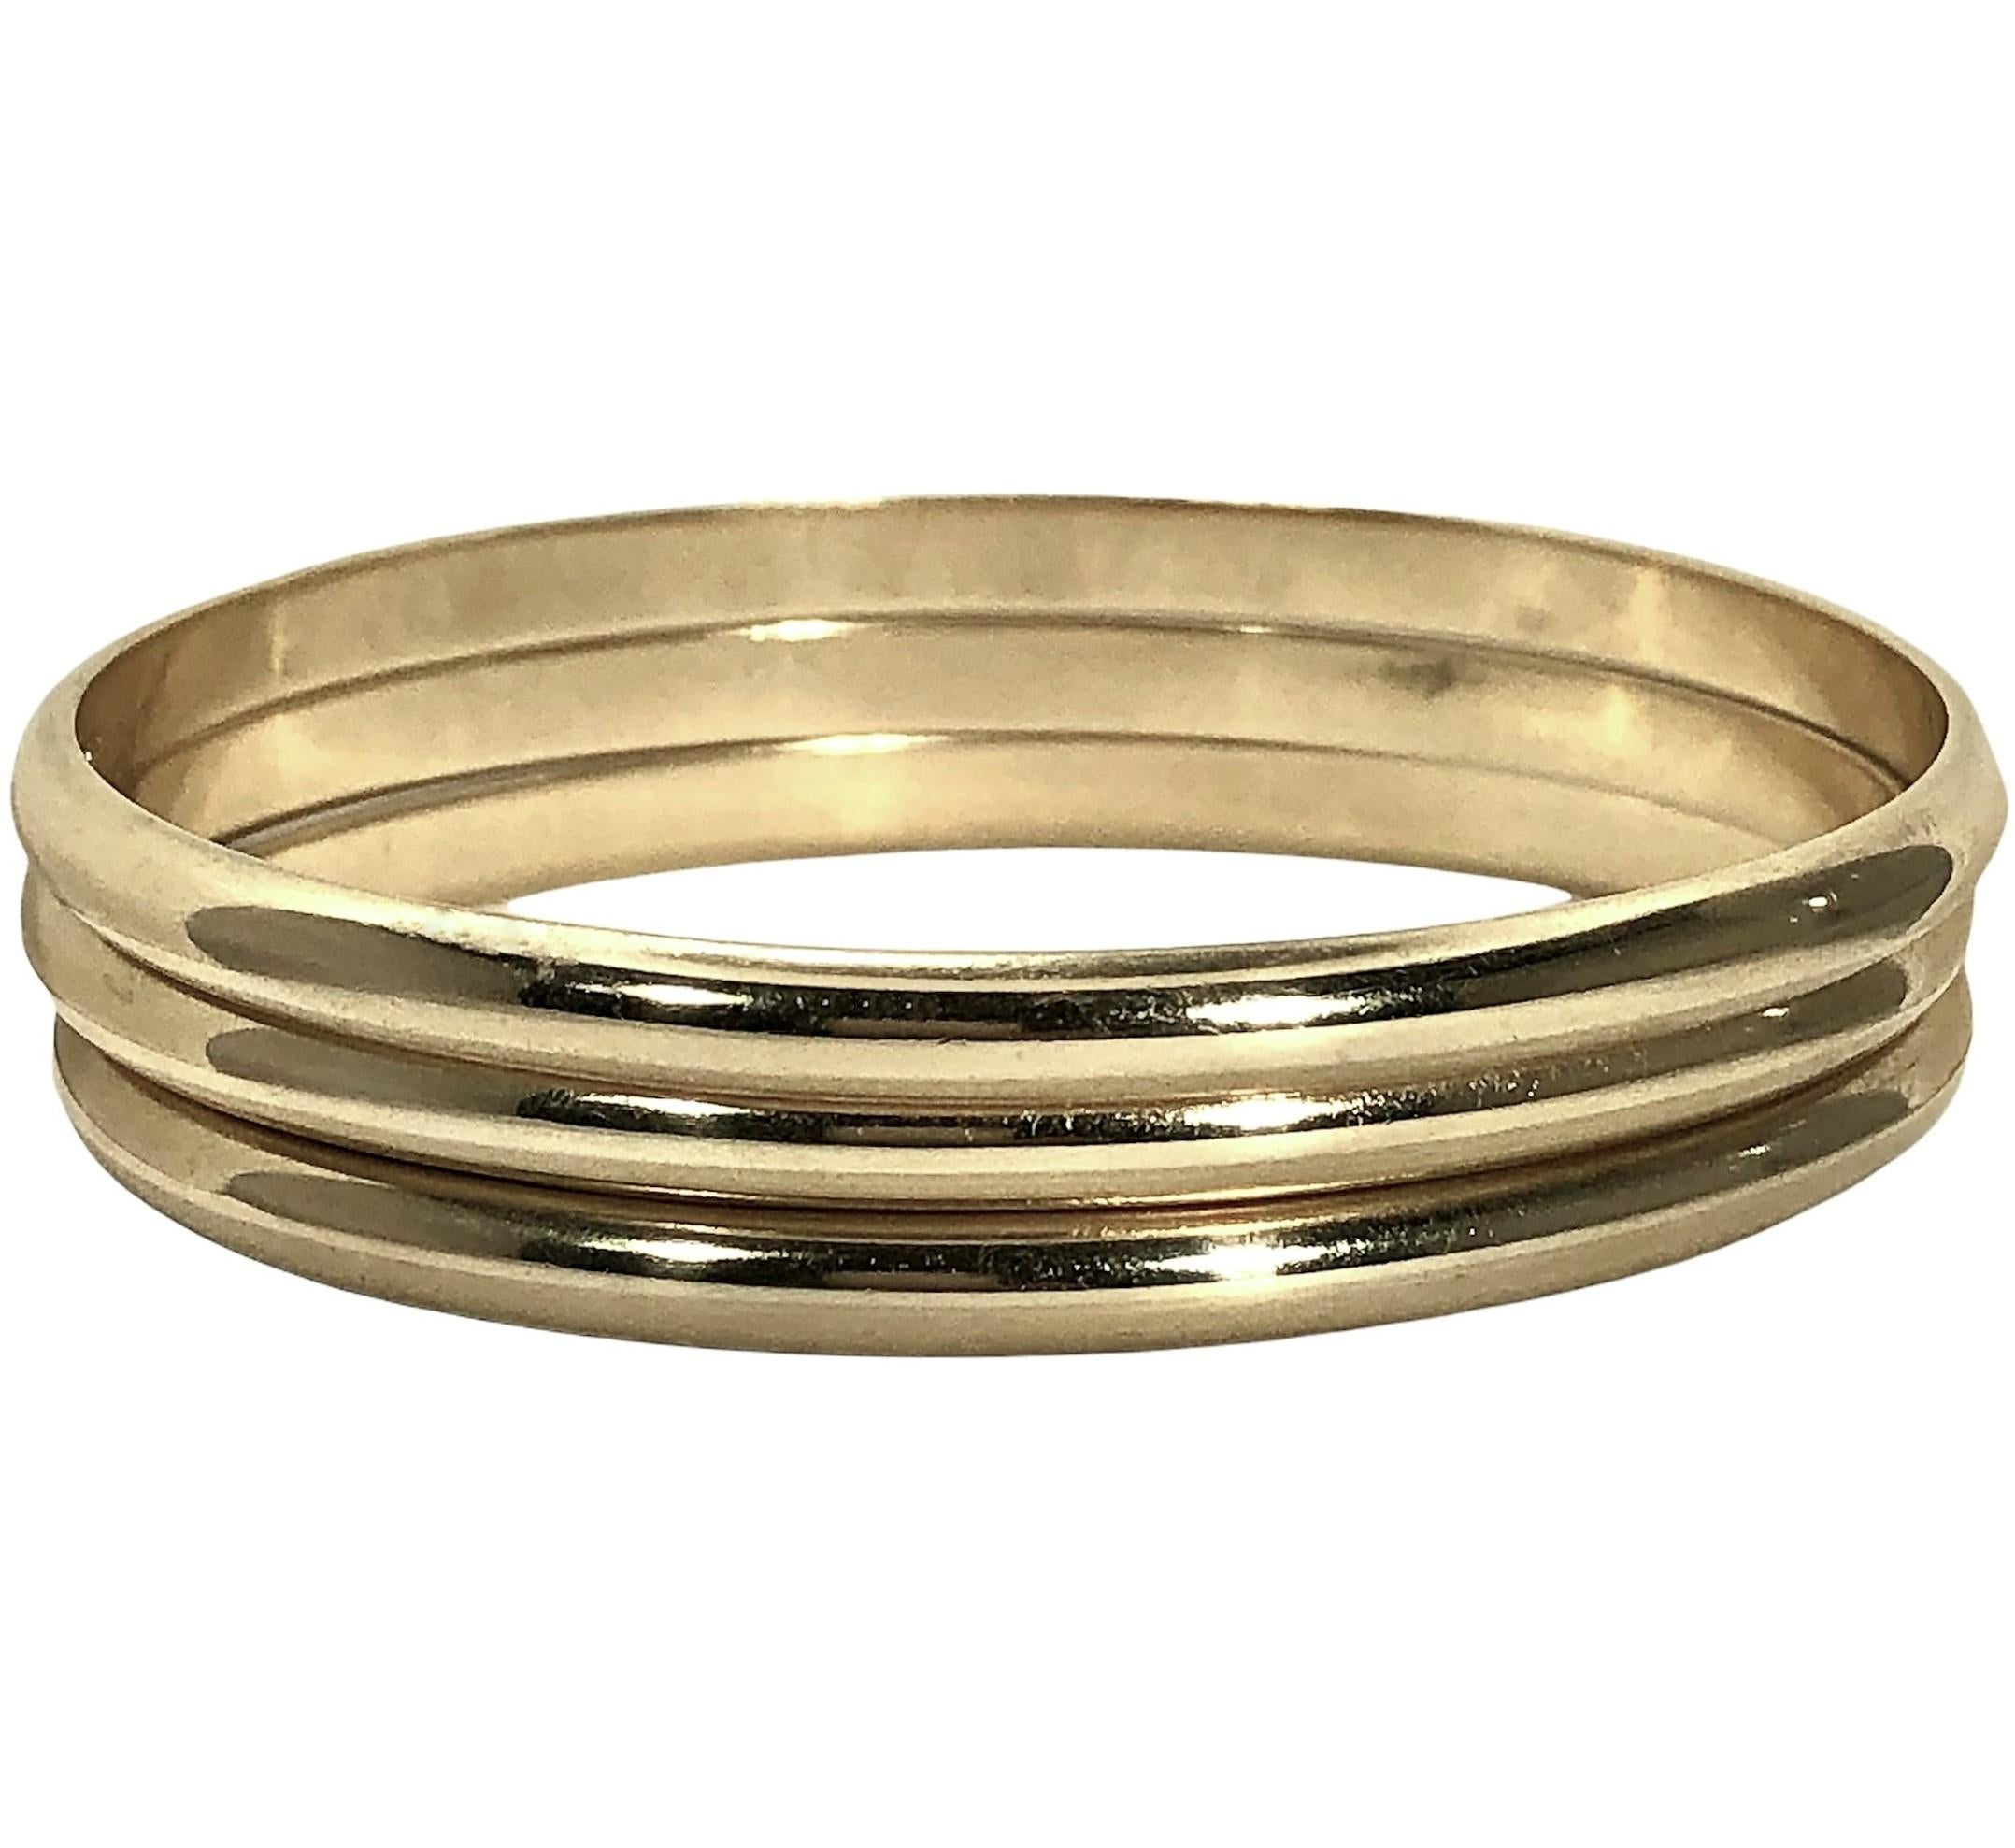 This vintage Tiffany & Co. 14K yellow gold, three piece bangle bracelet set is the epitome of tailored jewelry. The outside of each bangle is curved or bombe style while the inside is smooth and flat, making them extremely comfortable to wear. The